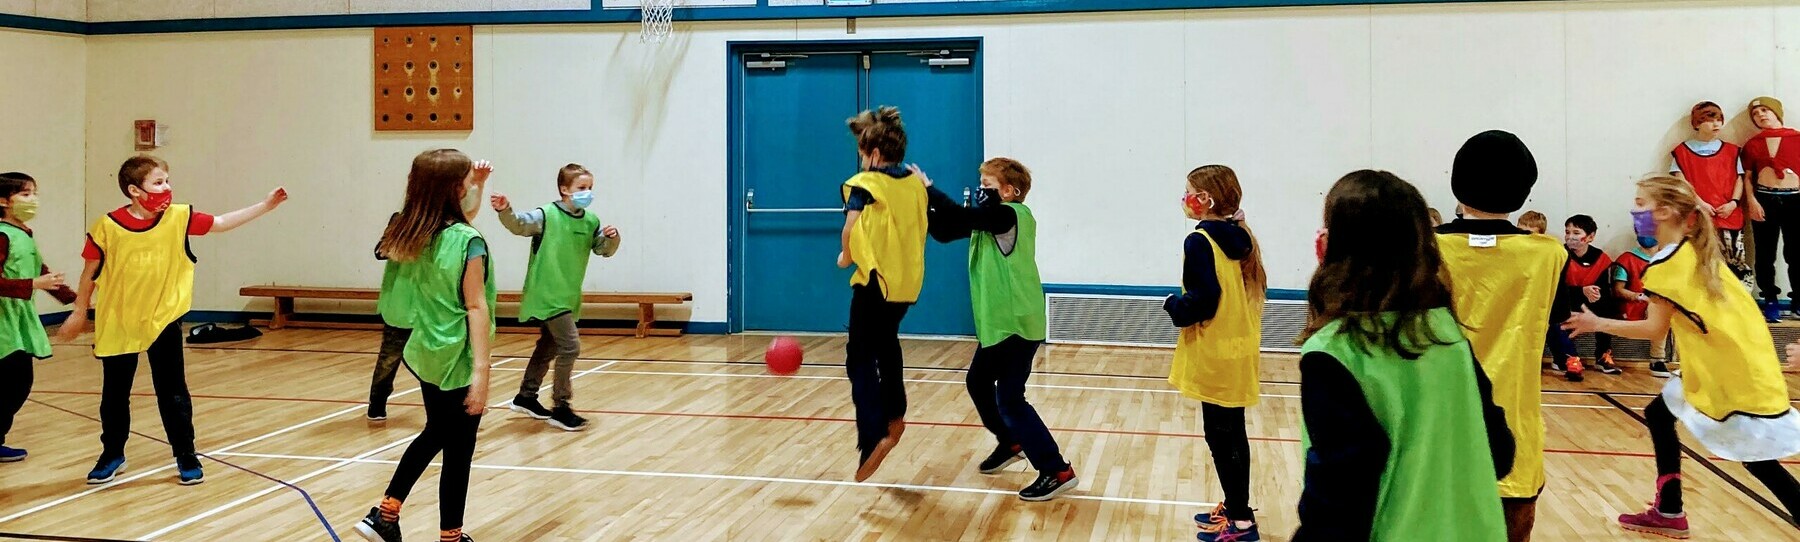 Students playing handball in the gym